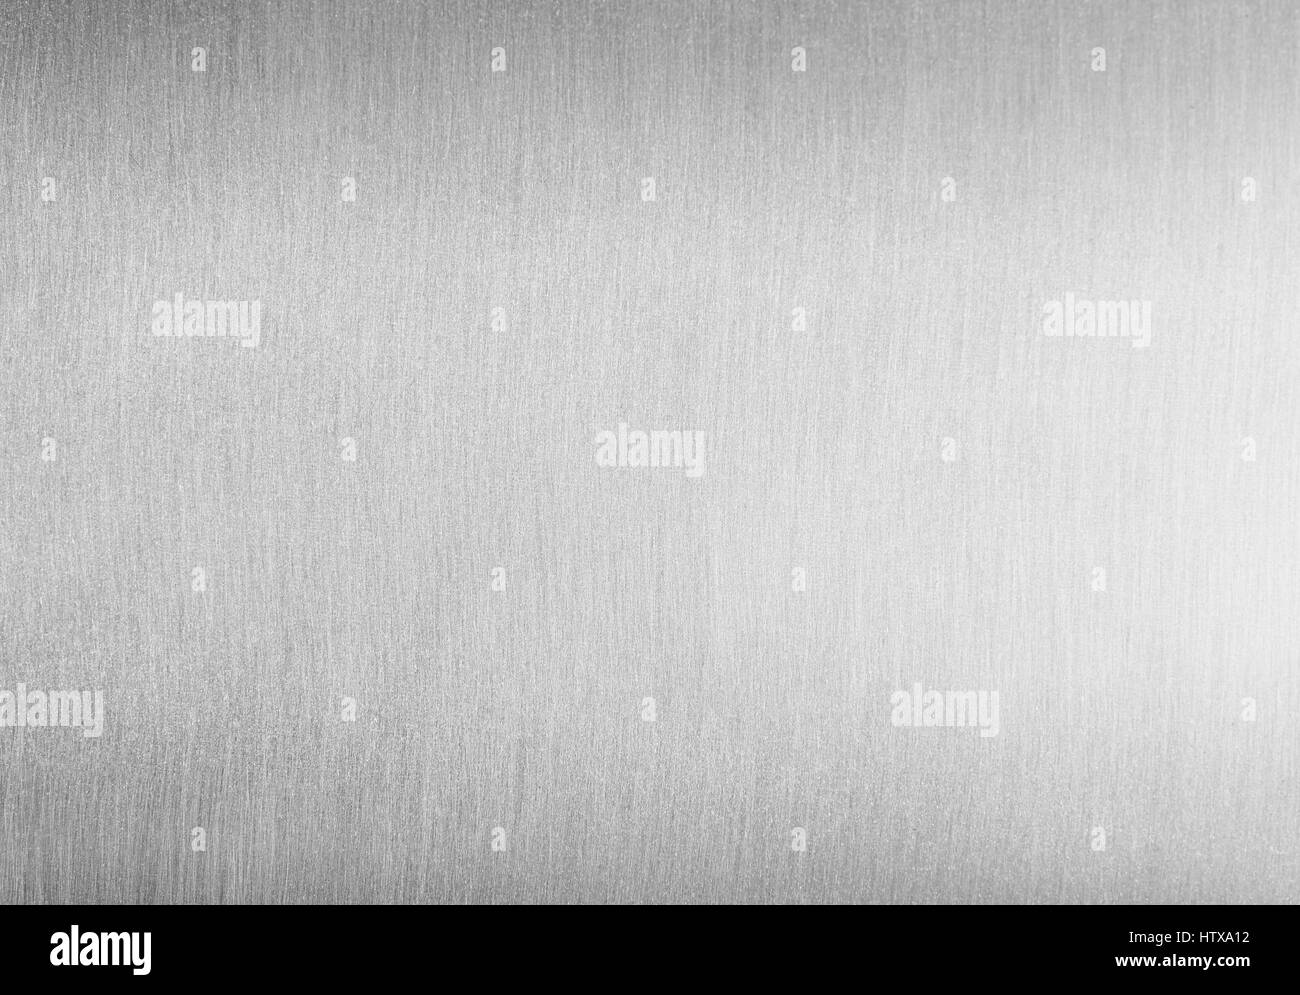 Brushed clean metal background. Stainless shiny blank steel texture Stock Photo